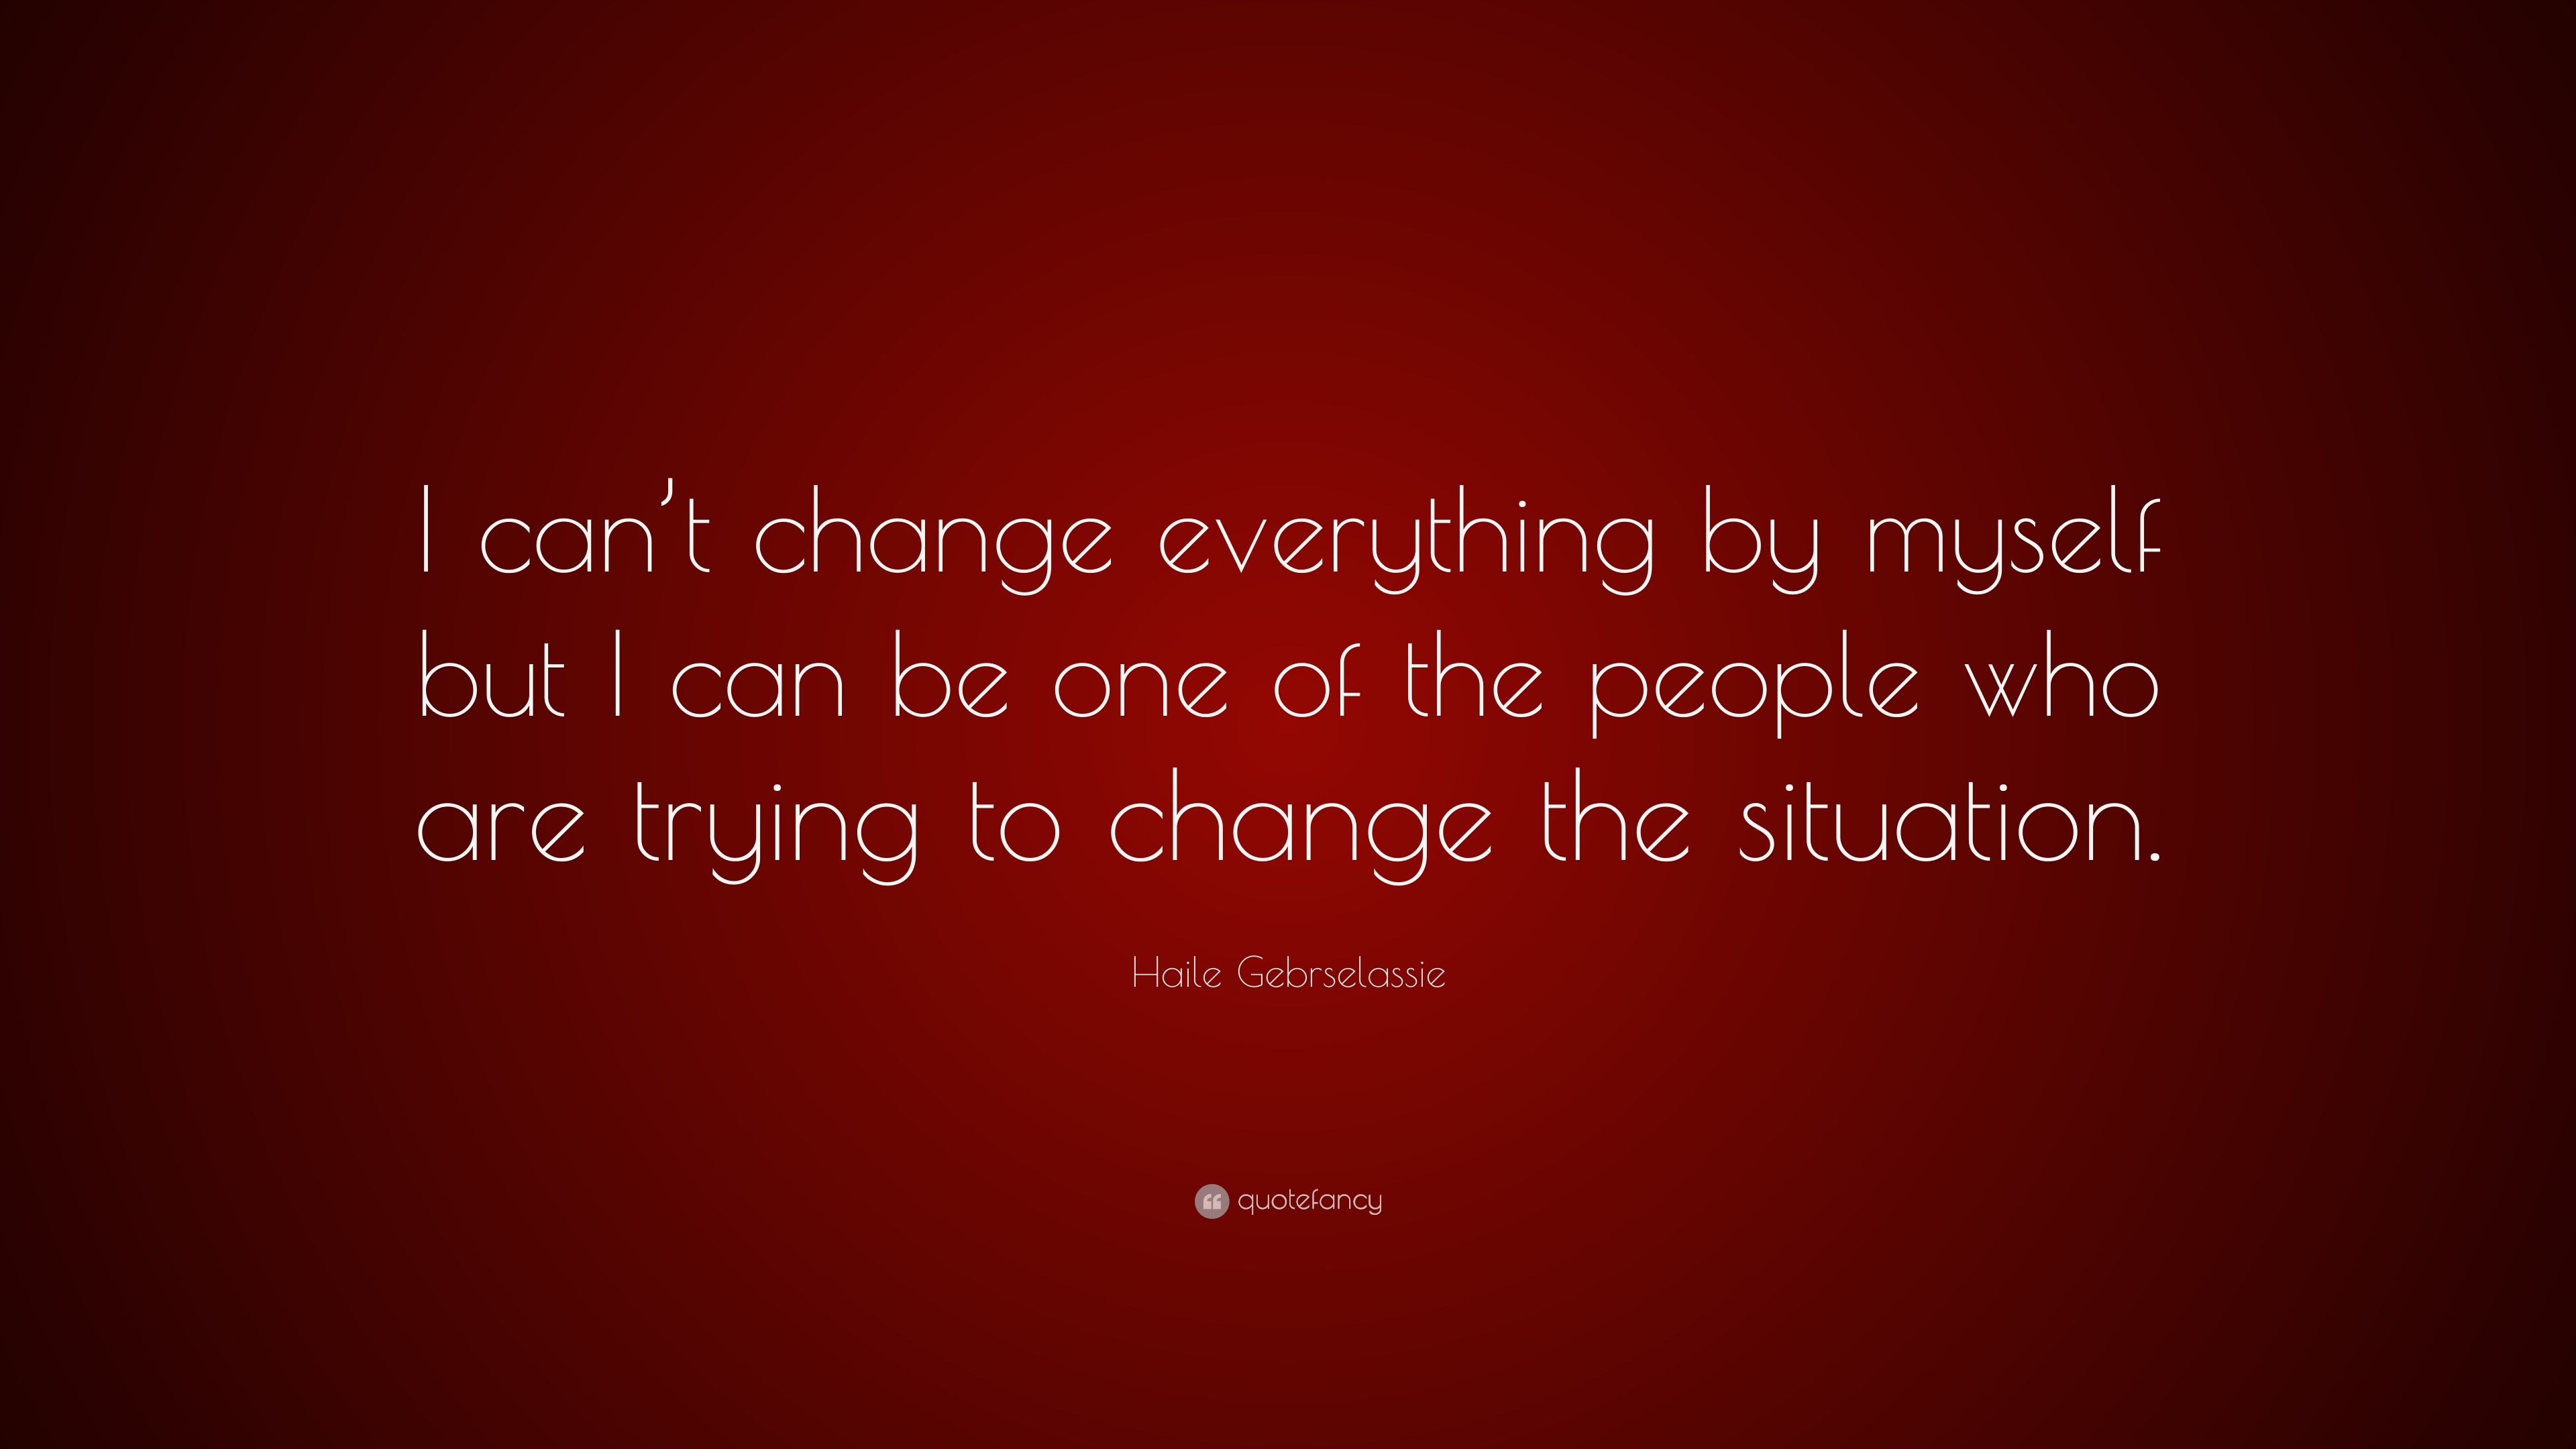 Haile Gebrselassie Quote: “I can’t change everything by myself but I ...